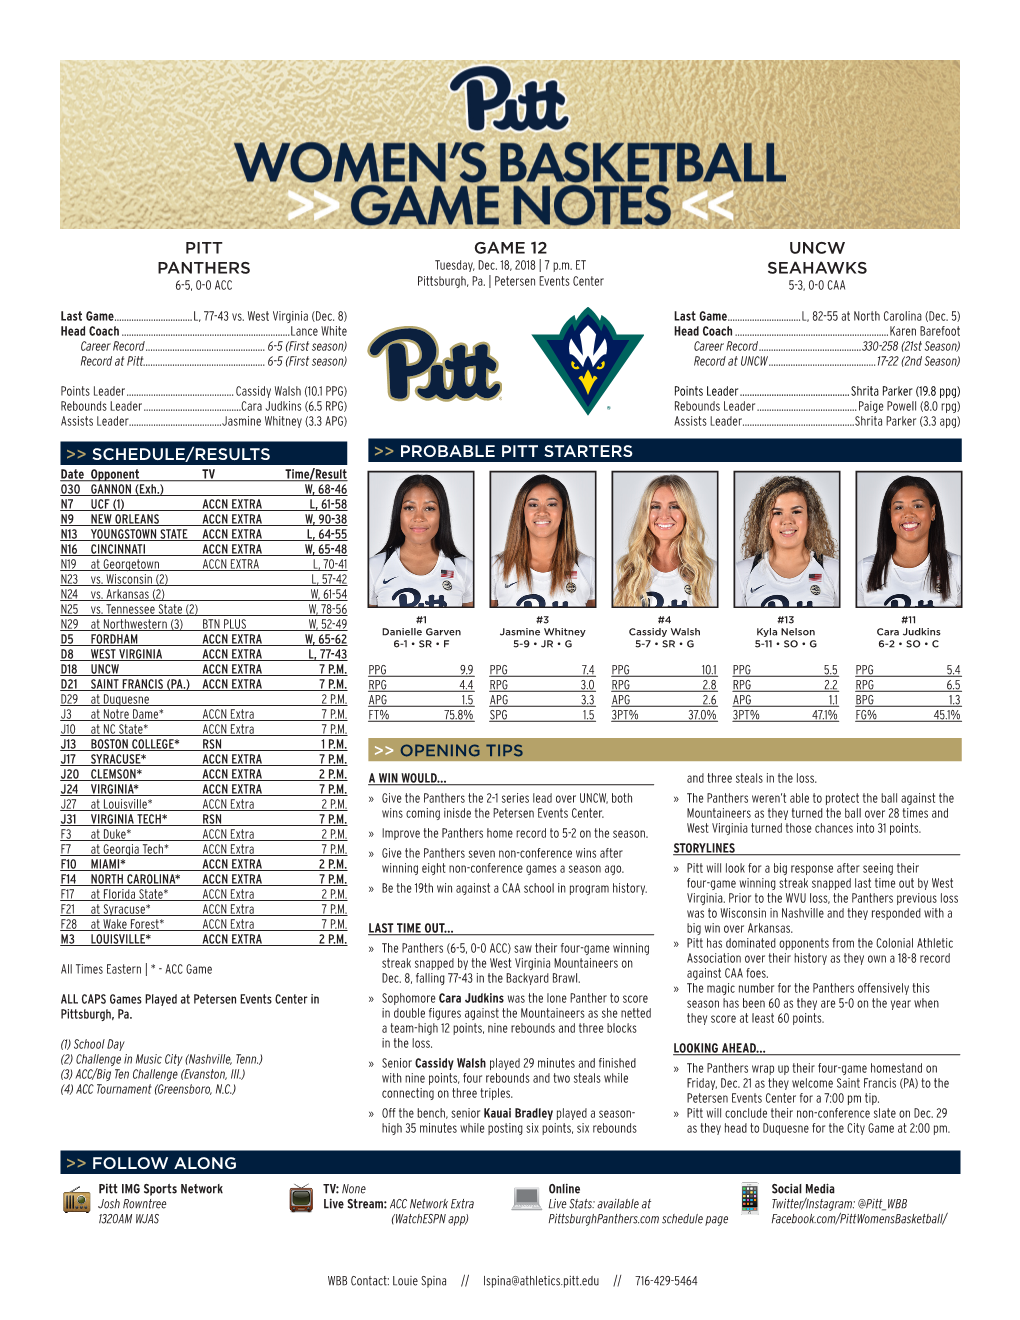 Schedule/Results Pitt Panthers Game 12 Uncw